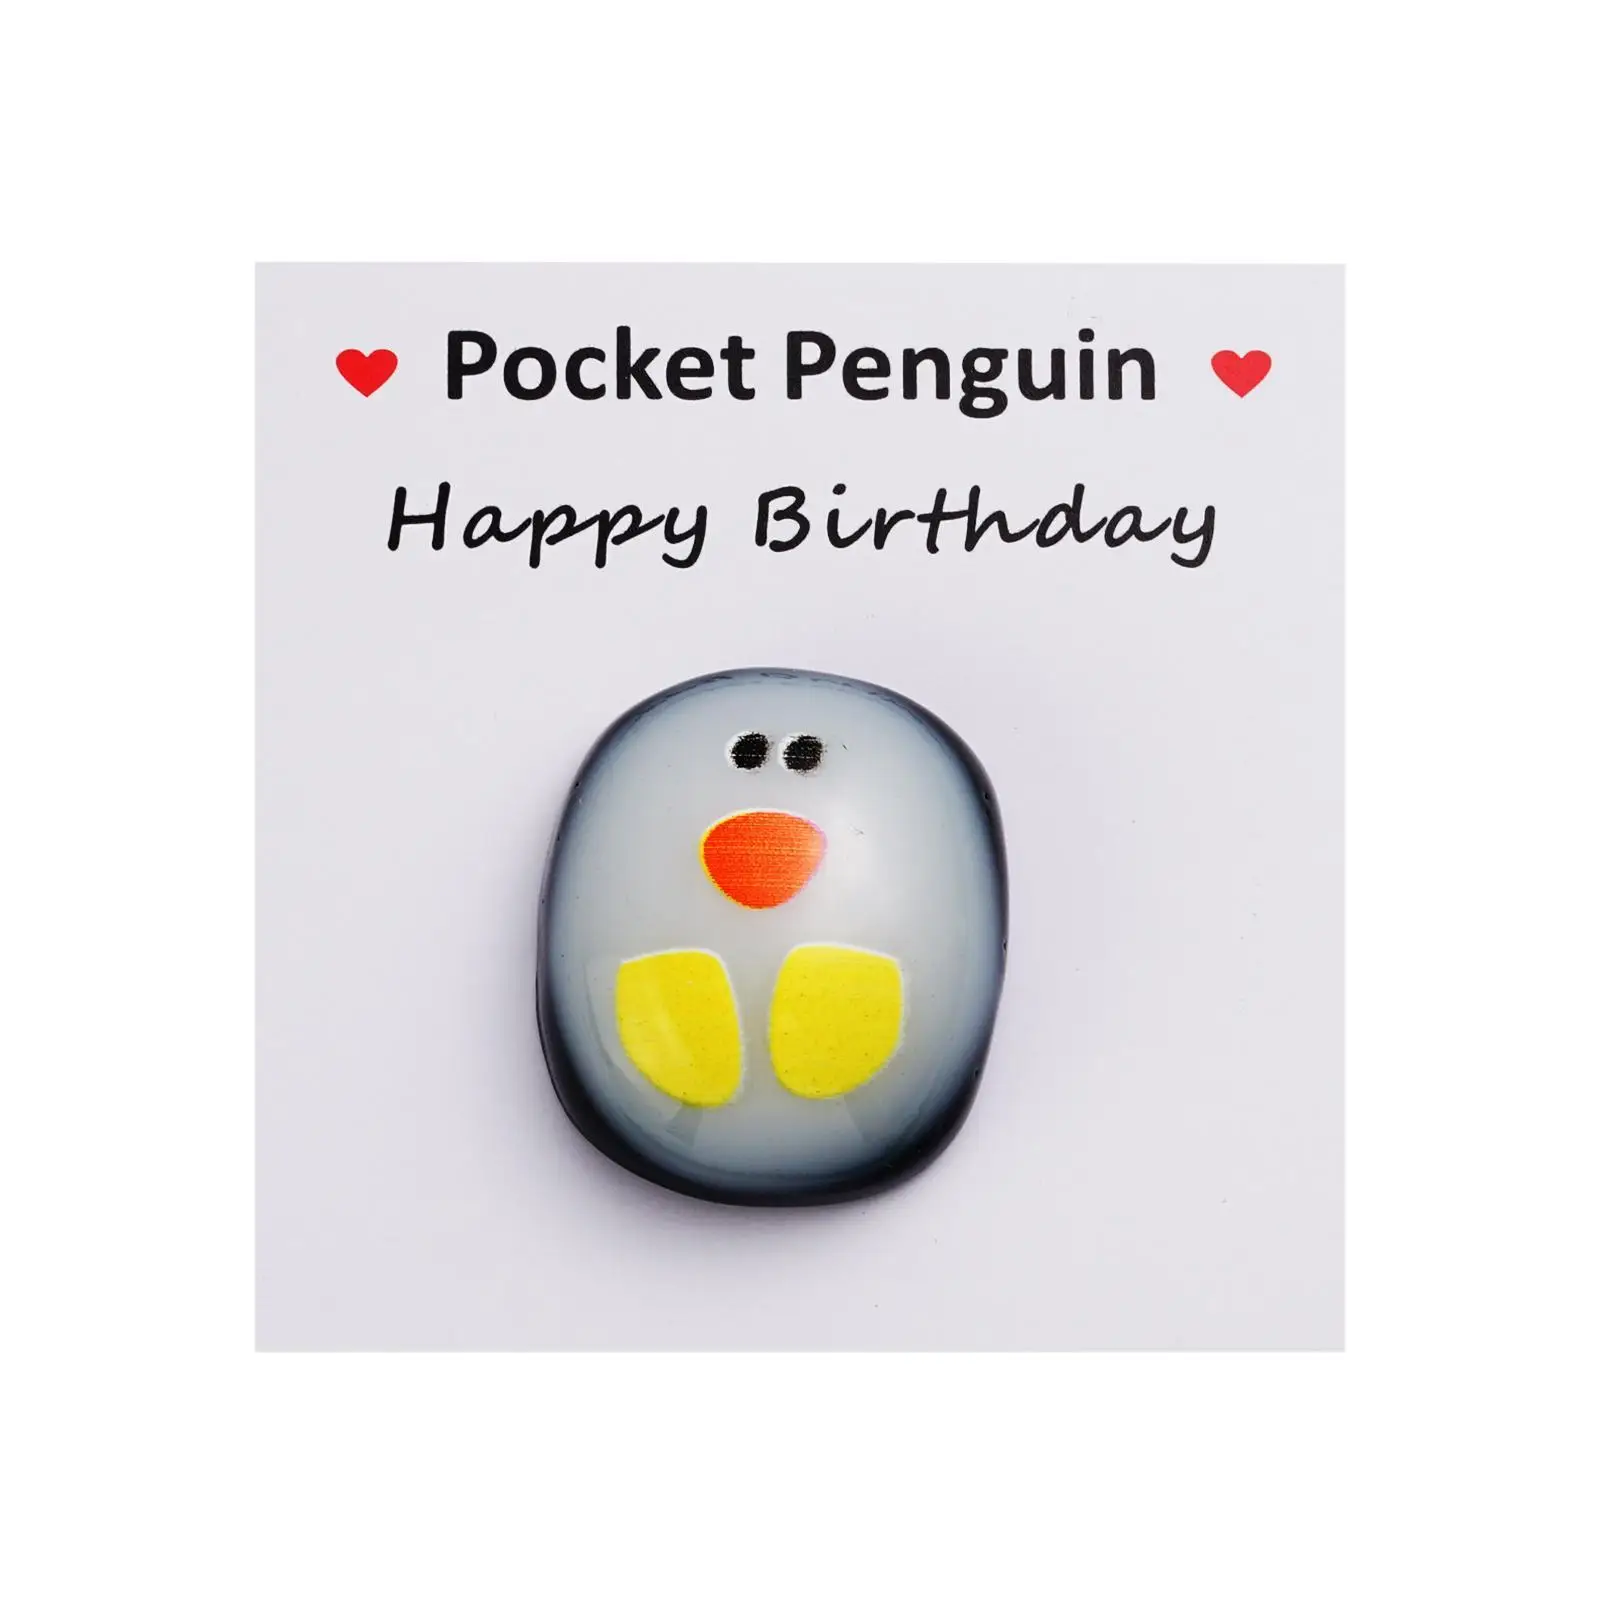 

A Little Pocket Penguin Hug Keepsake Ornament Cute Christmas Gift With Small Message Card Distance Social Present Party Decorati